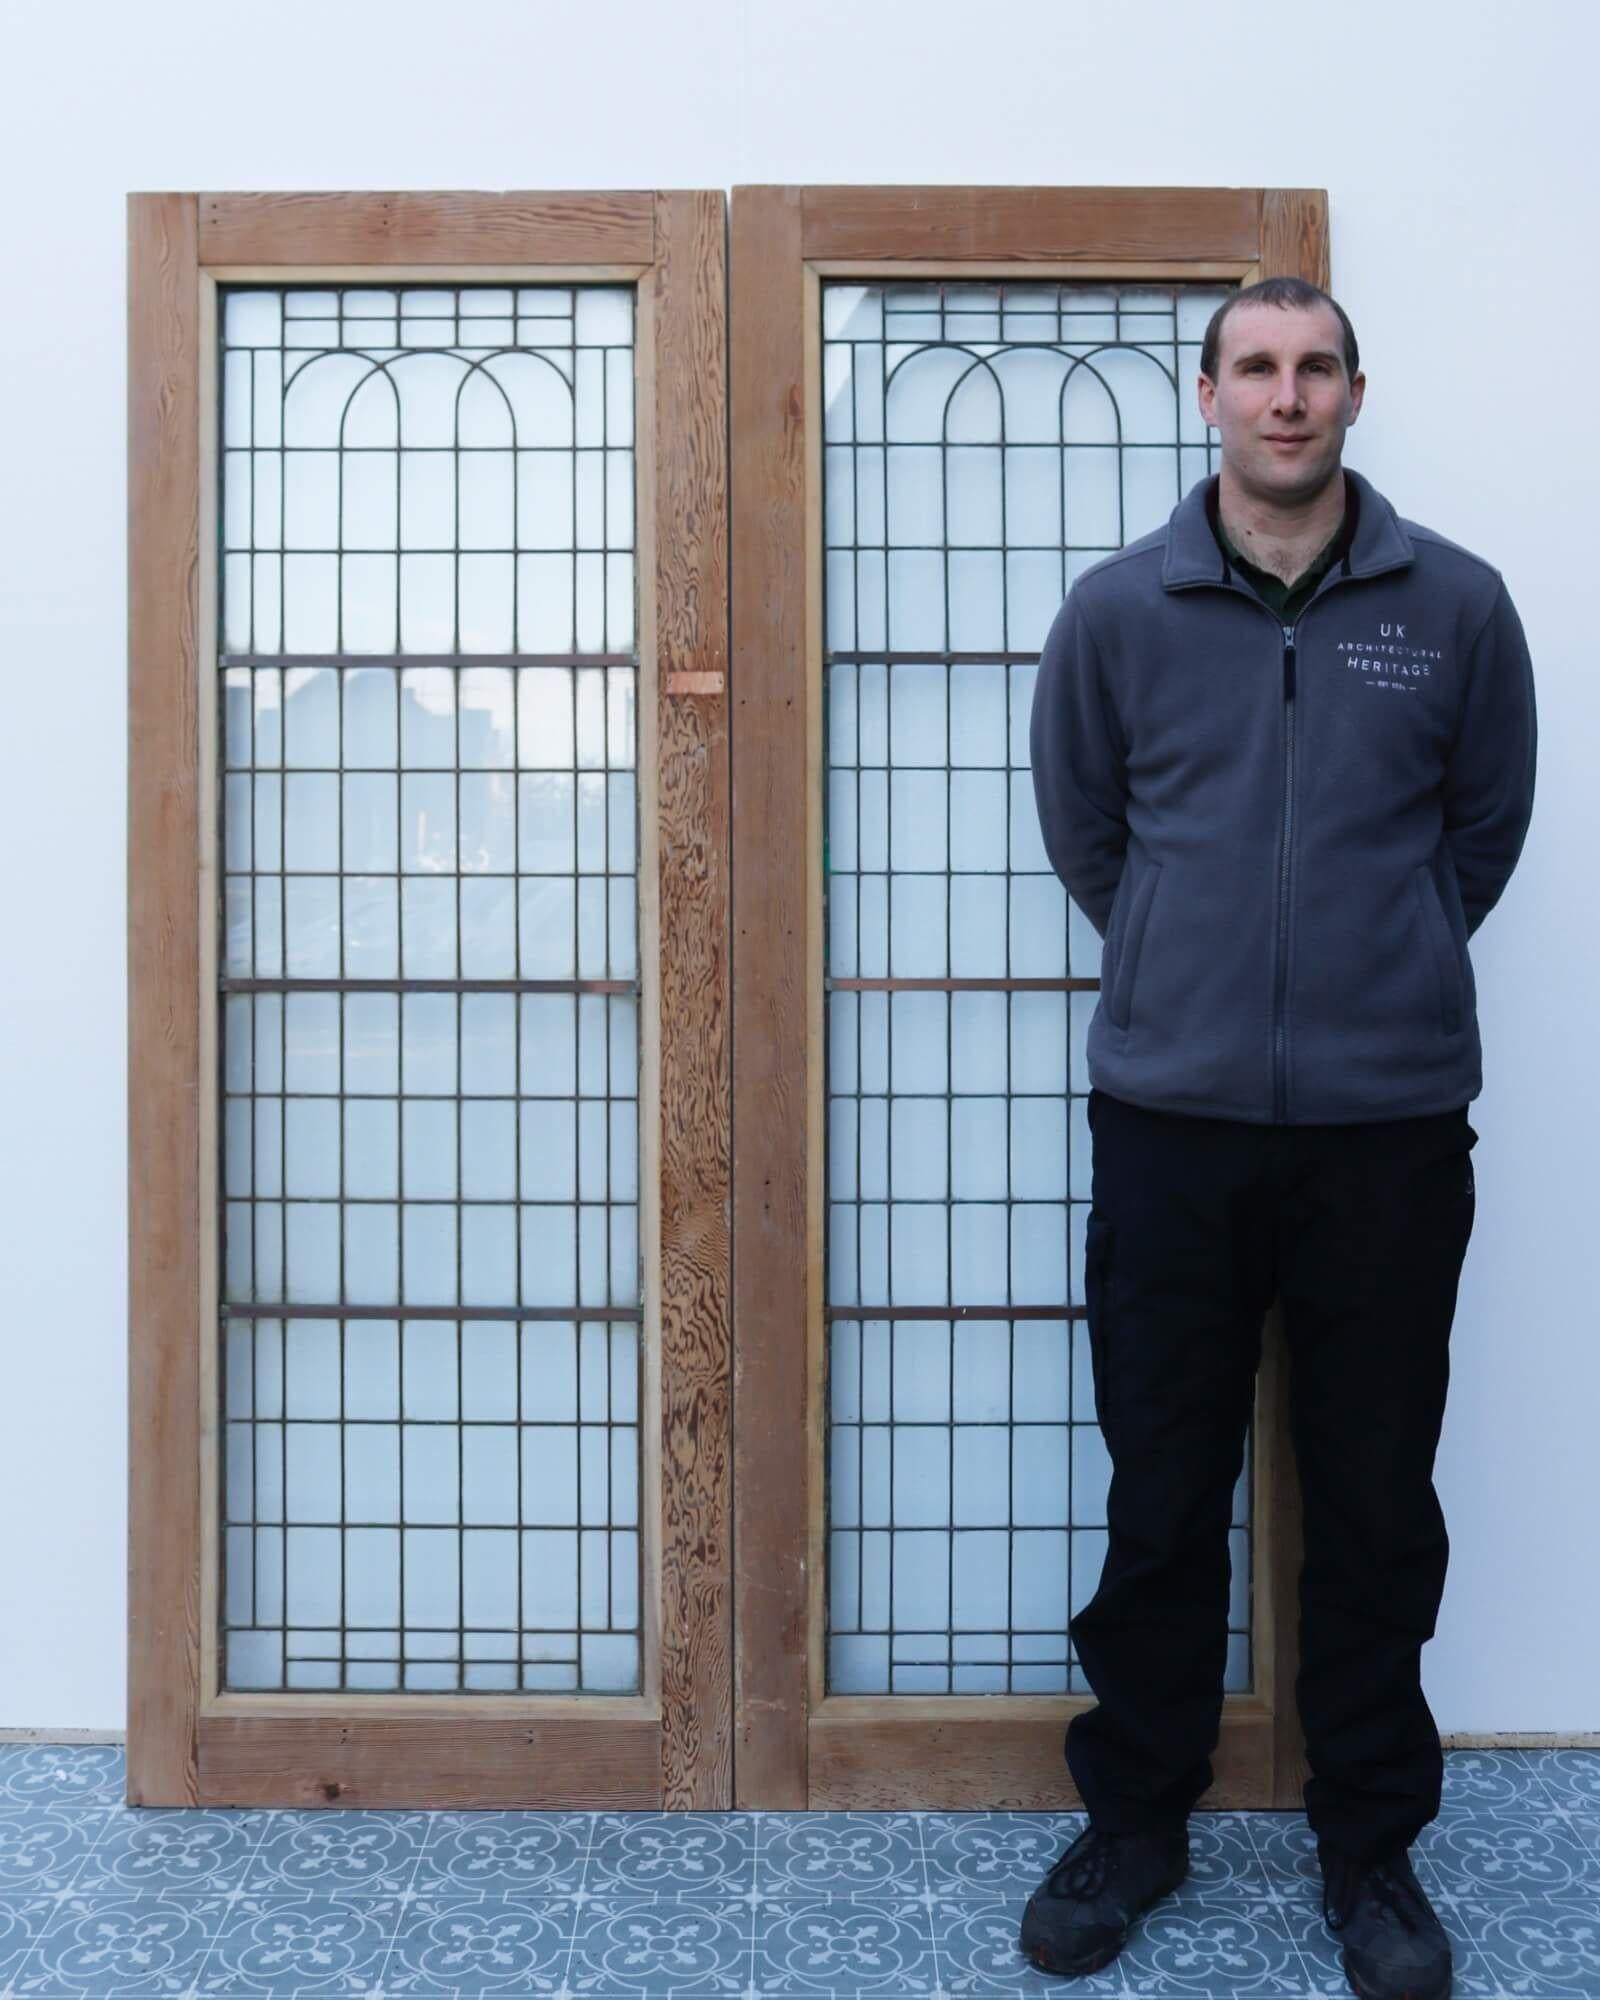 Bring the understated glamour of the Art Deco era to a property with this stylish set of 1920s internal double doors. Each door features full length copperlight glazing within a stripped and sanded pine wood frame with a natural finish. They make a